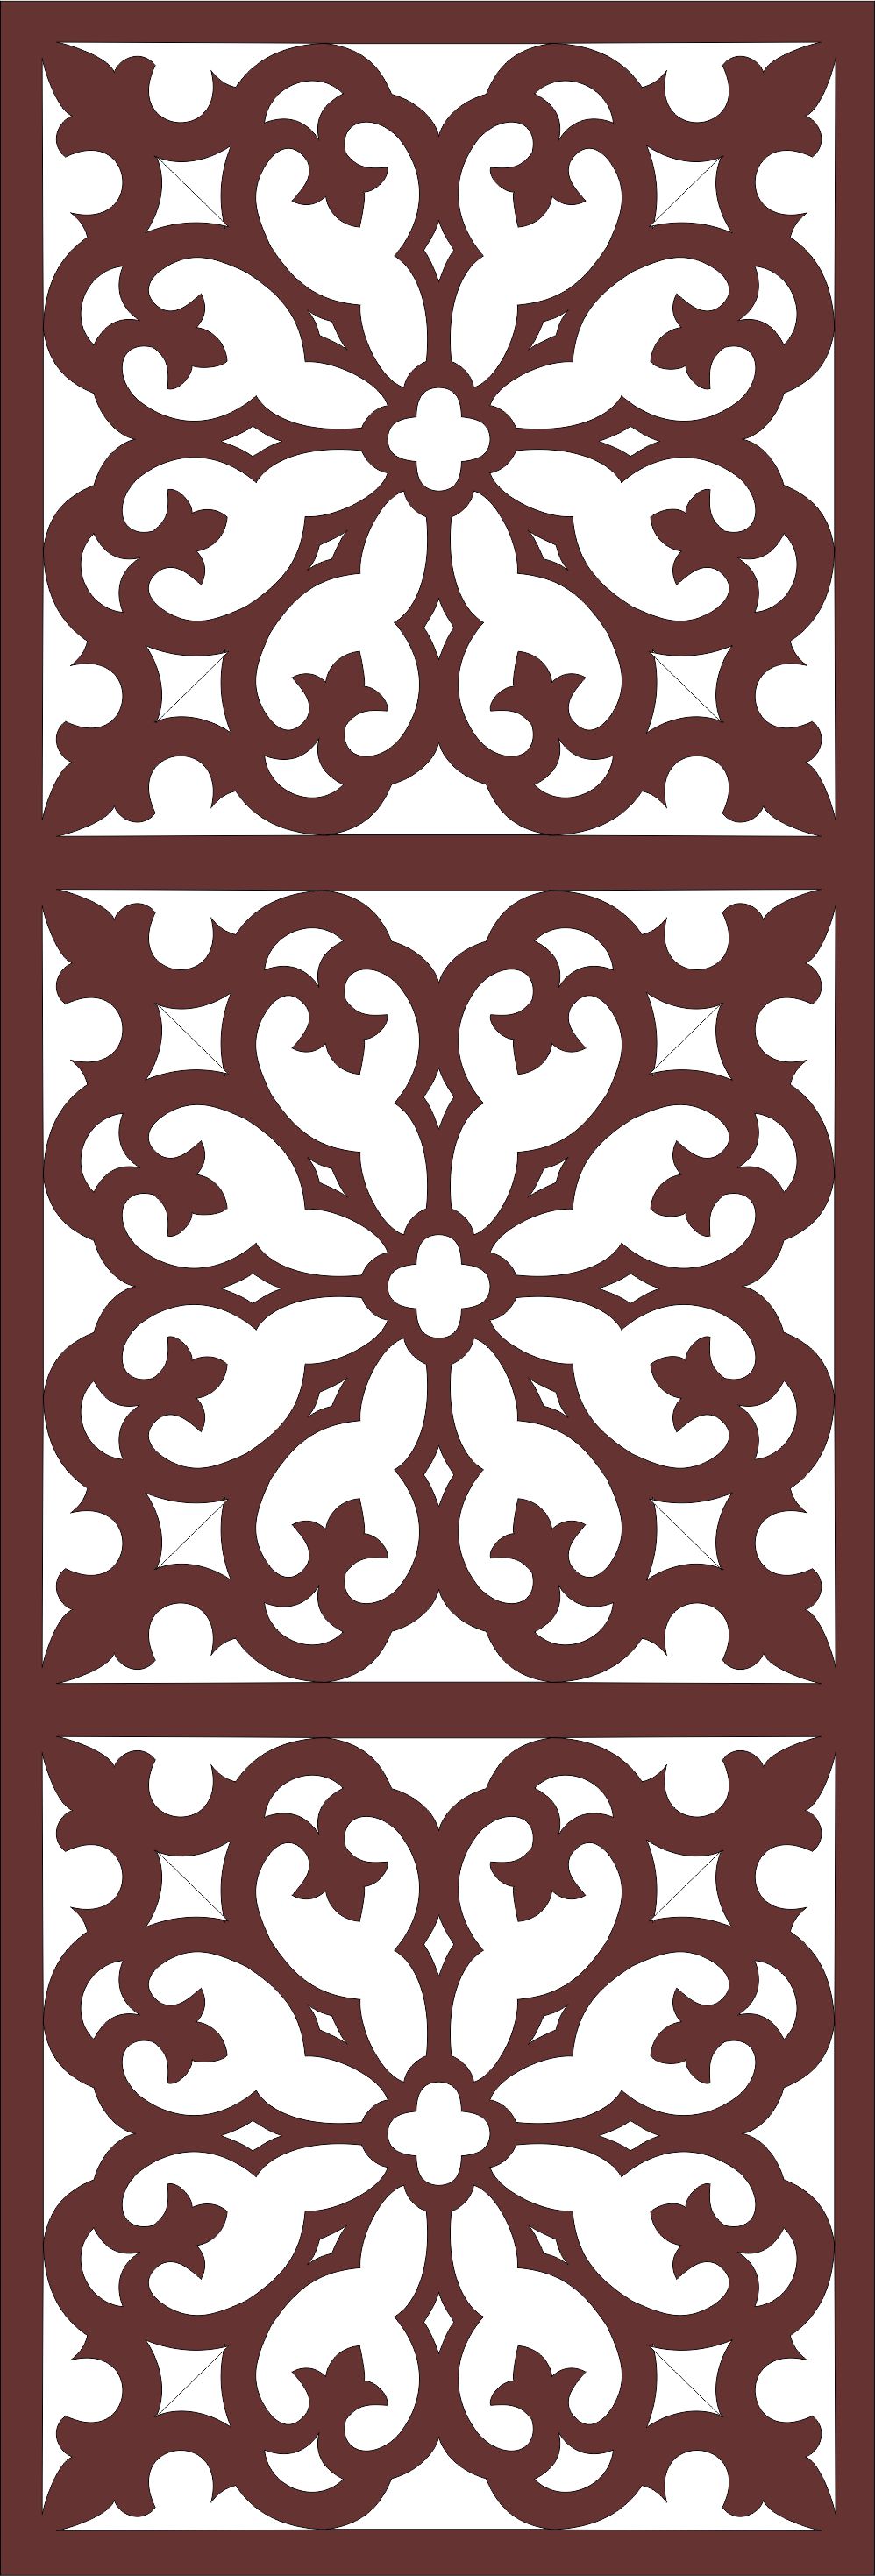 Living Room Seamless Floral Grill Design For Laser Cutting Free DXF File